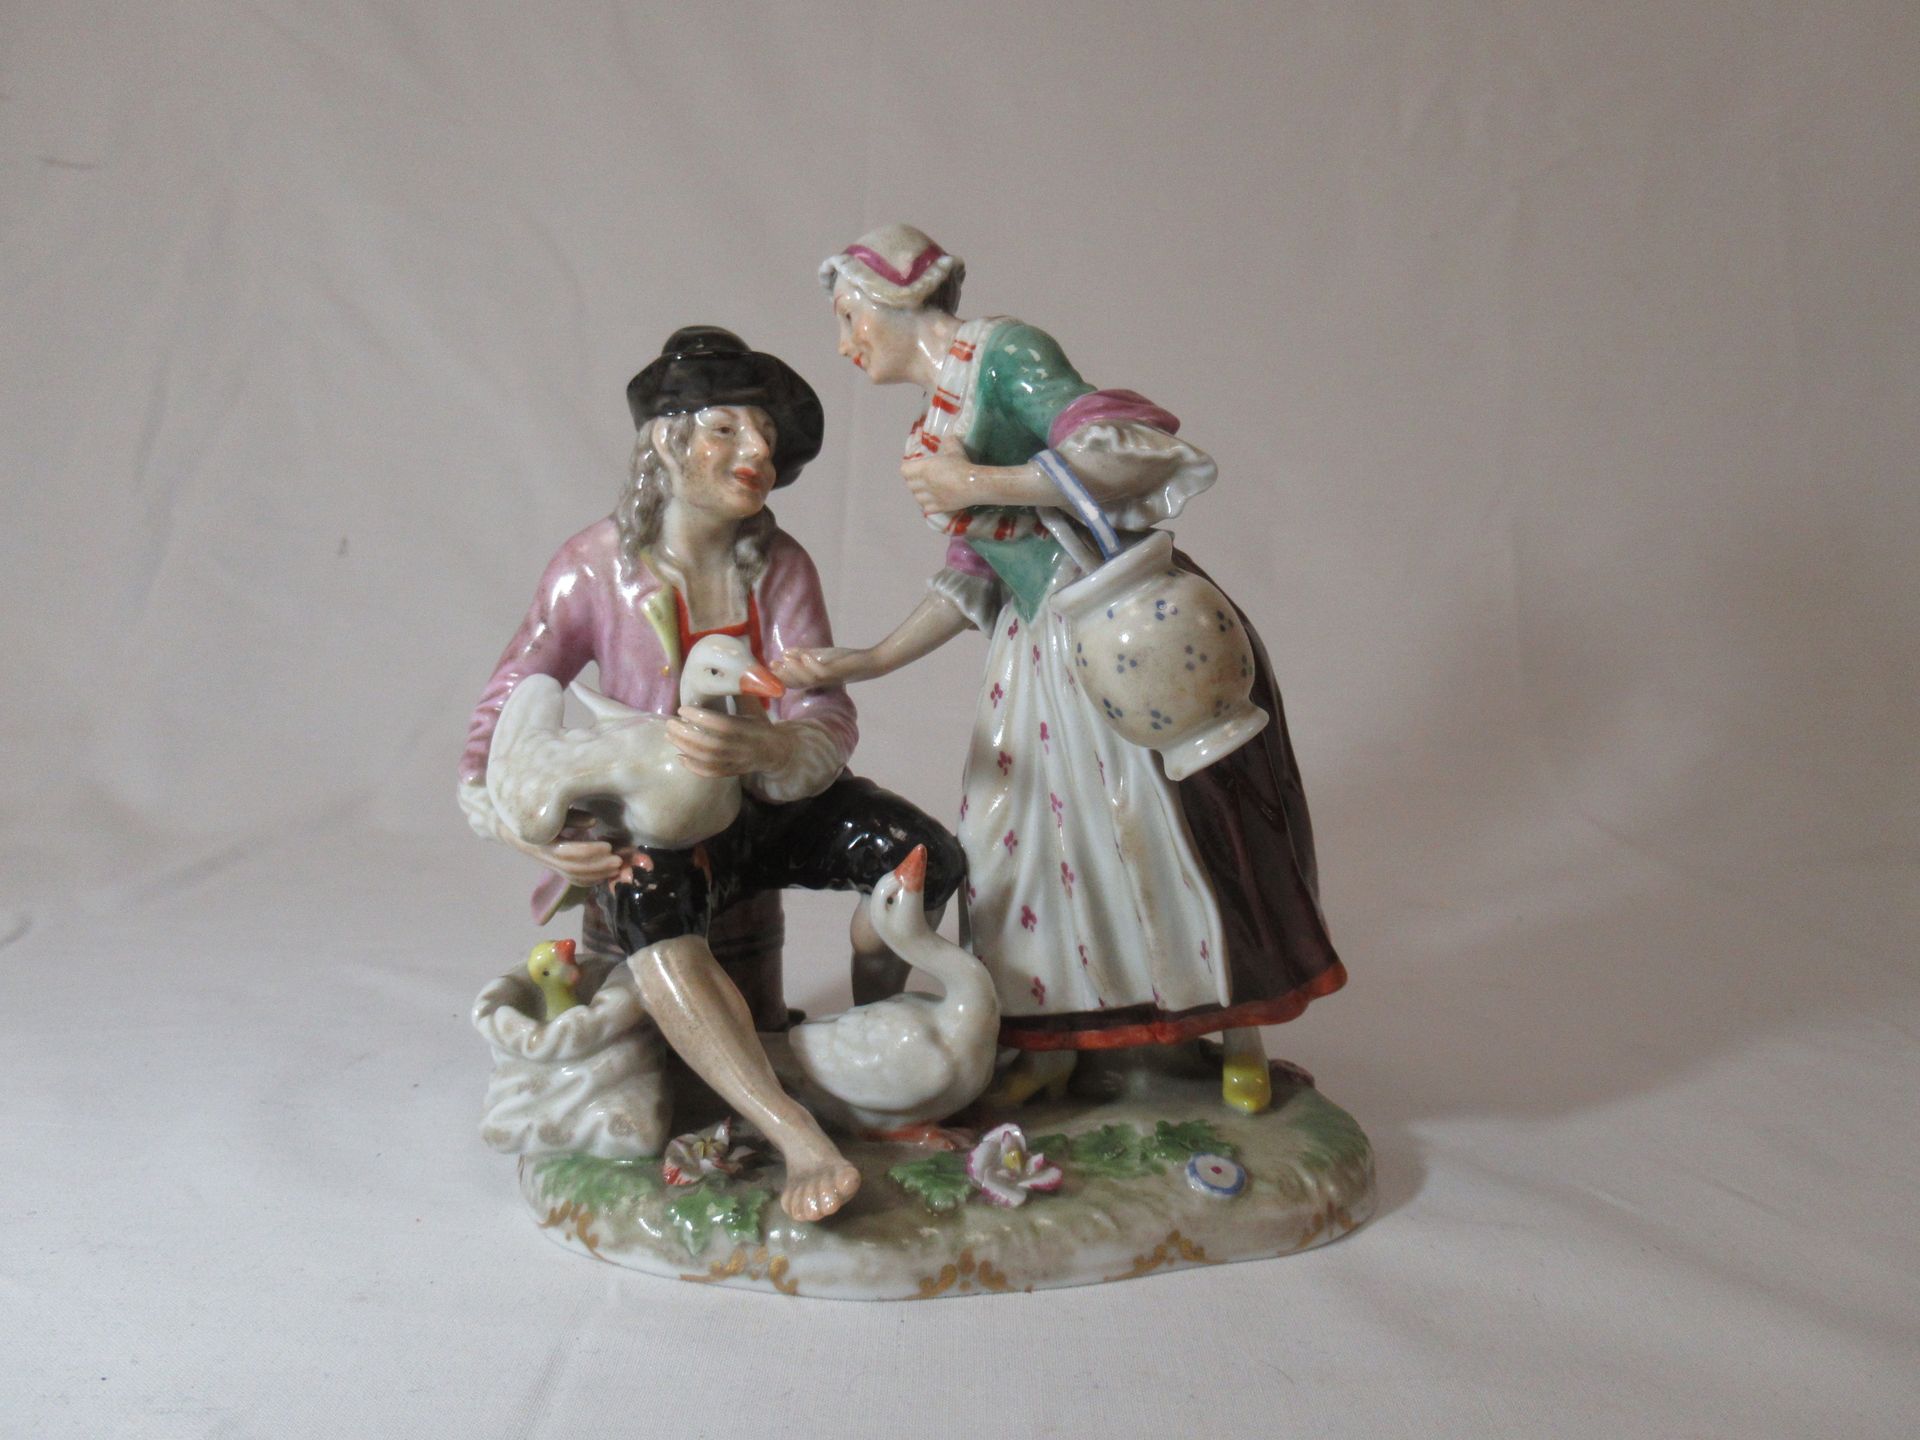 Null VIENNA (?) Sculpture in polychrome porcelain, showing peasants. 14 x 14 cm